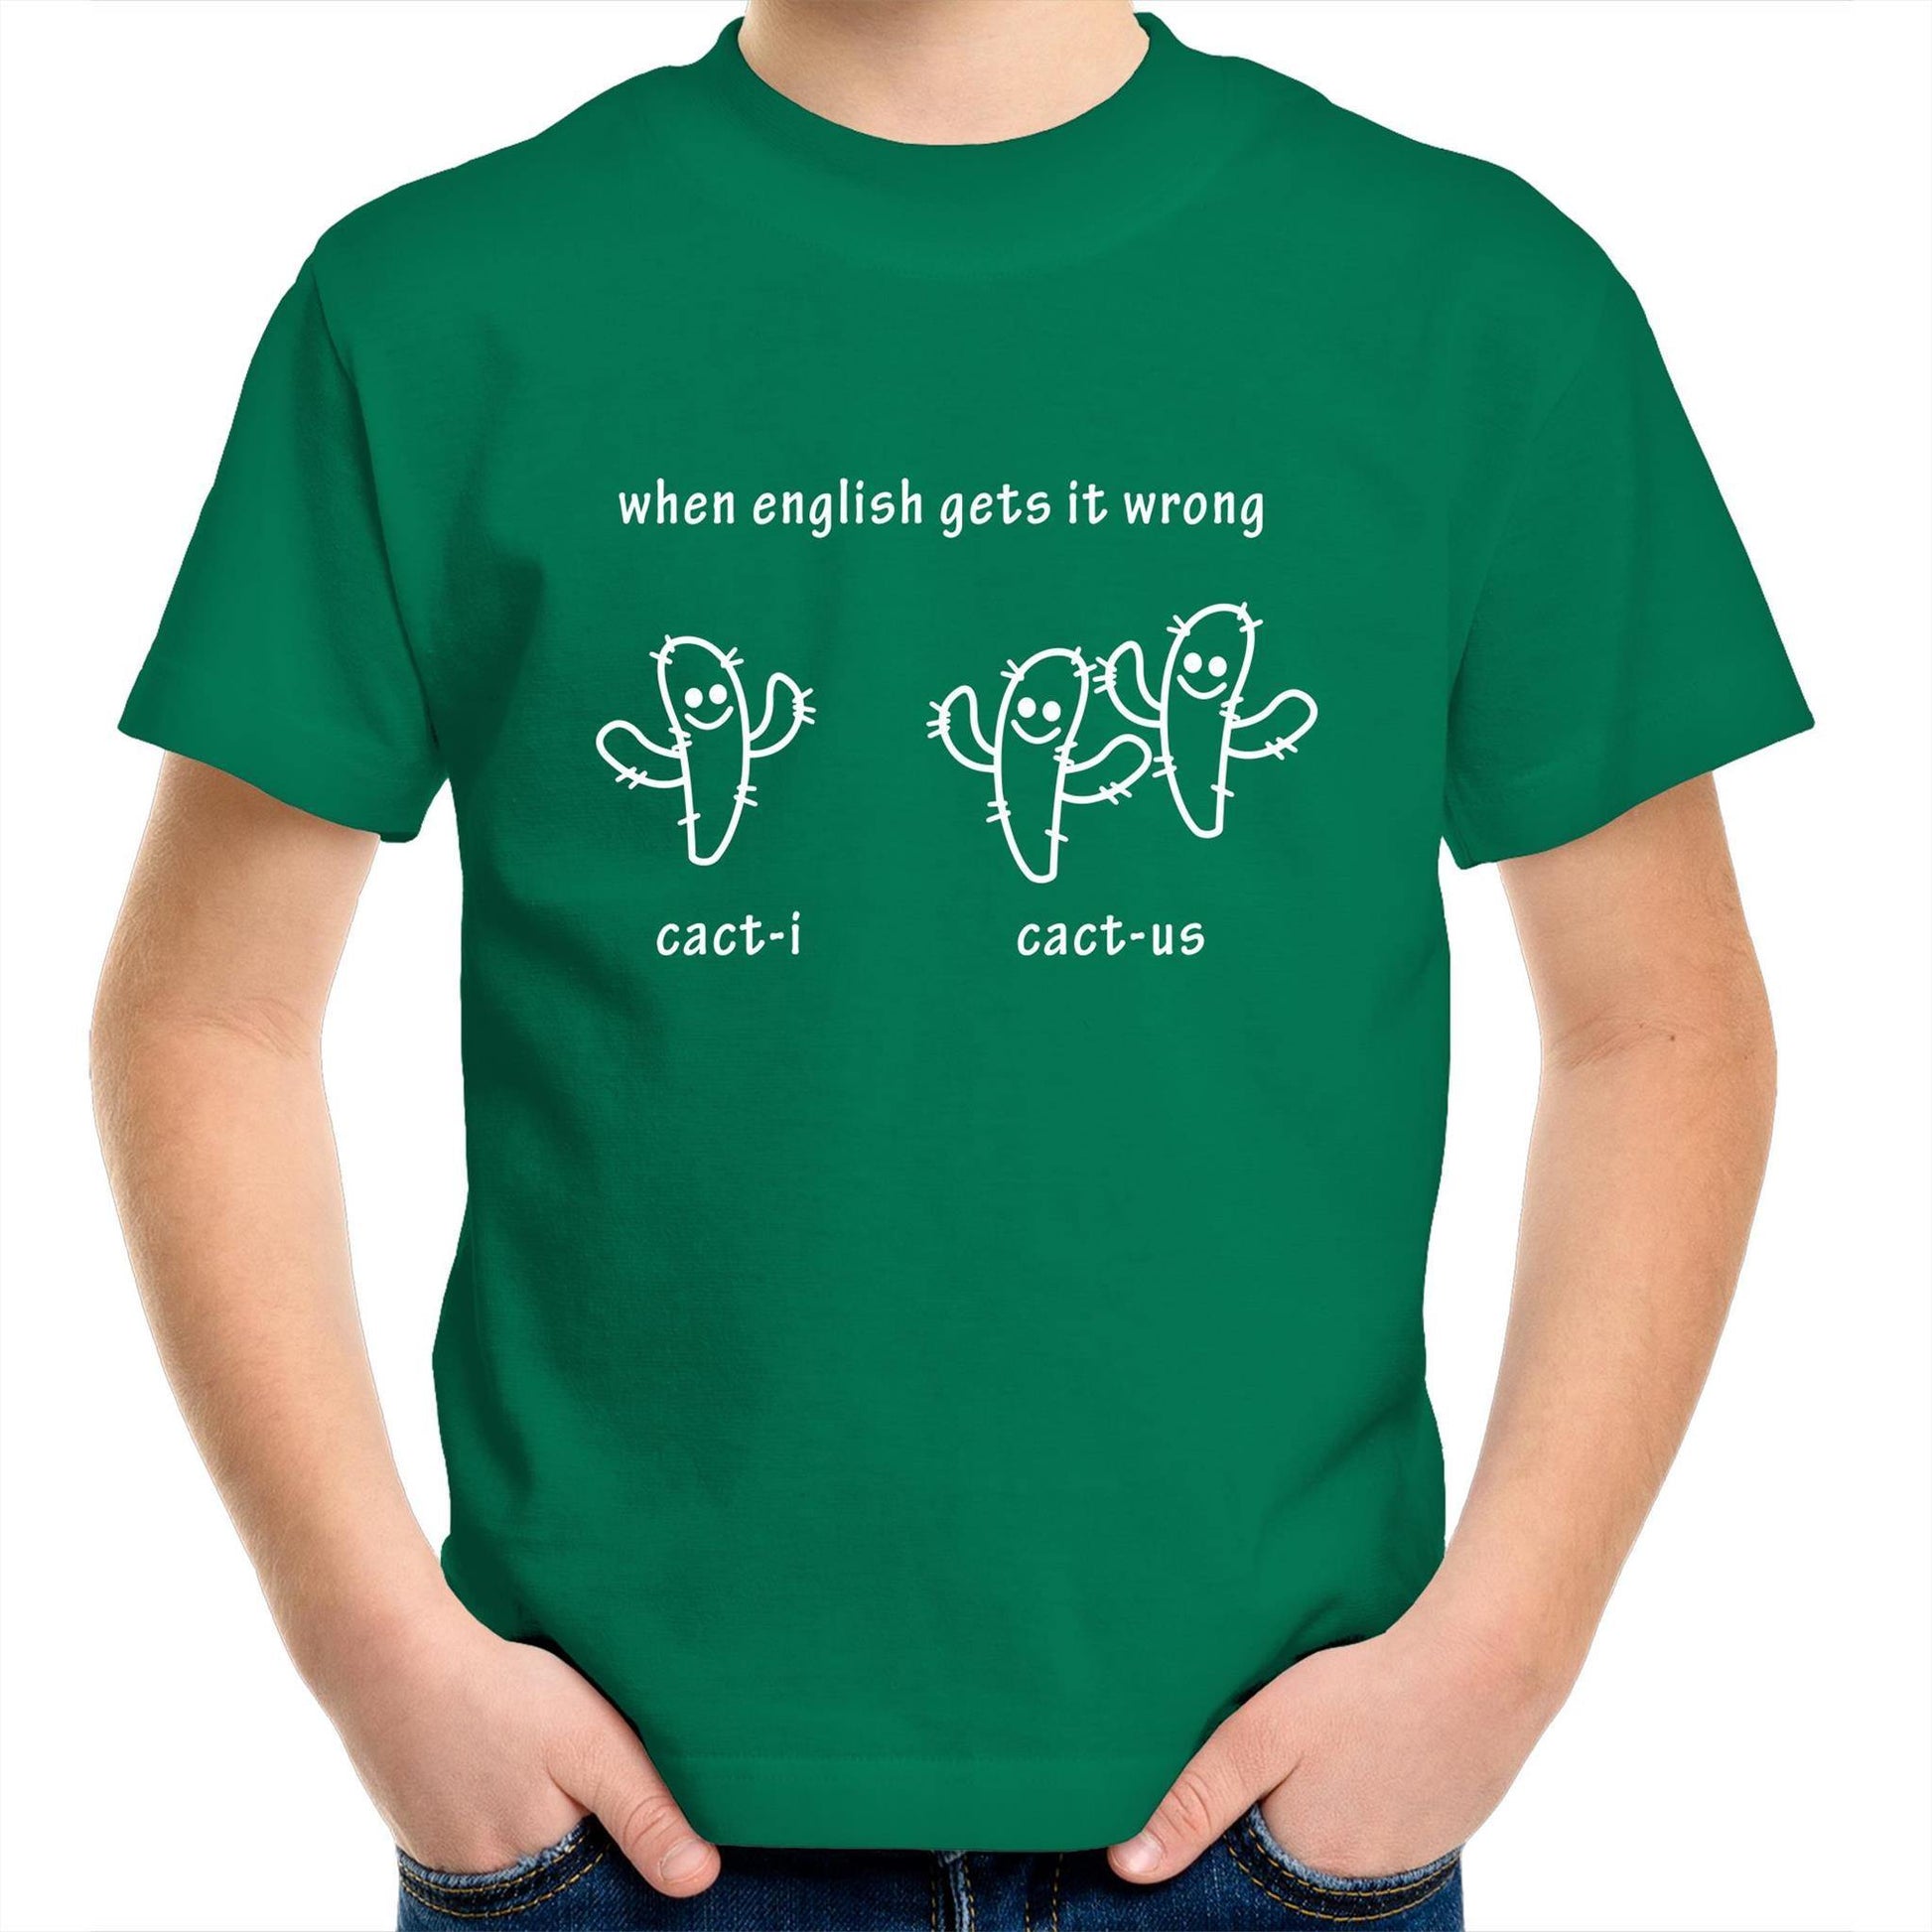 Cacti Cactus - Kids Youth Crew T-Shirt Kelly Green Kids Youth T-shirt Funny Plants